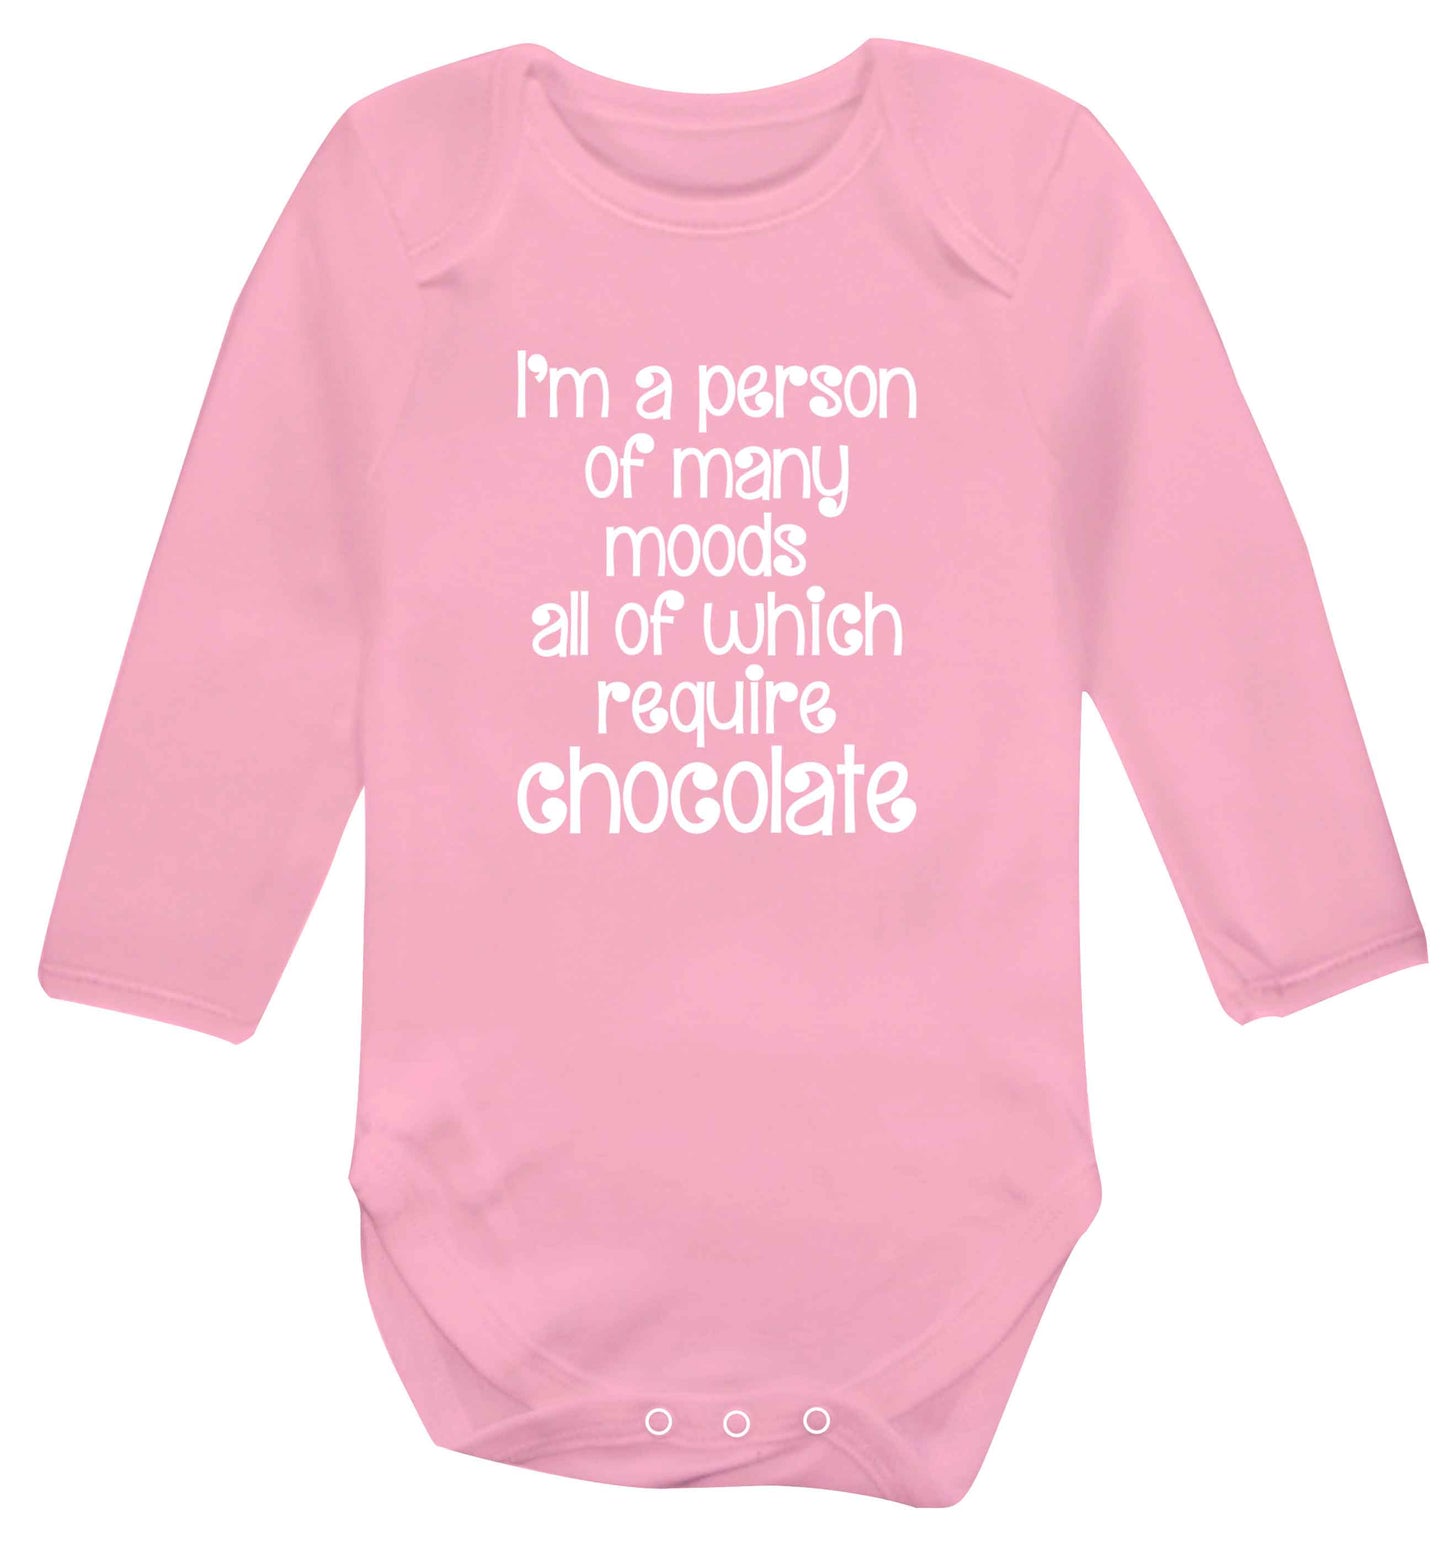 funny gift for a chocaholic! I'm a person of many moods all of which require chocolate baby vest long sleeved pale pink 6-12 months